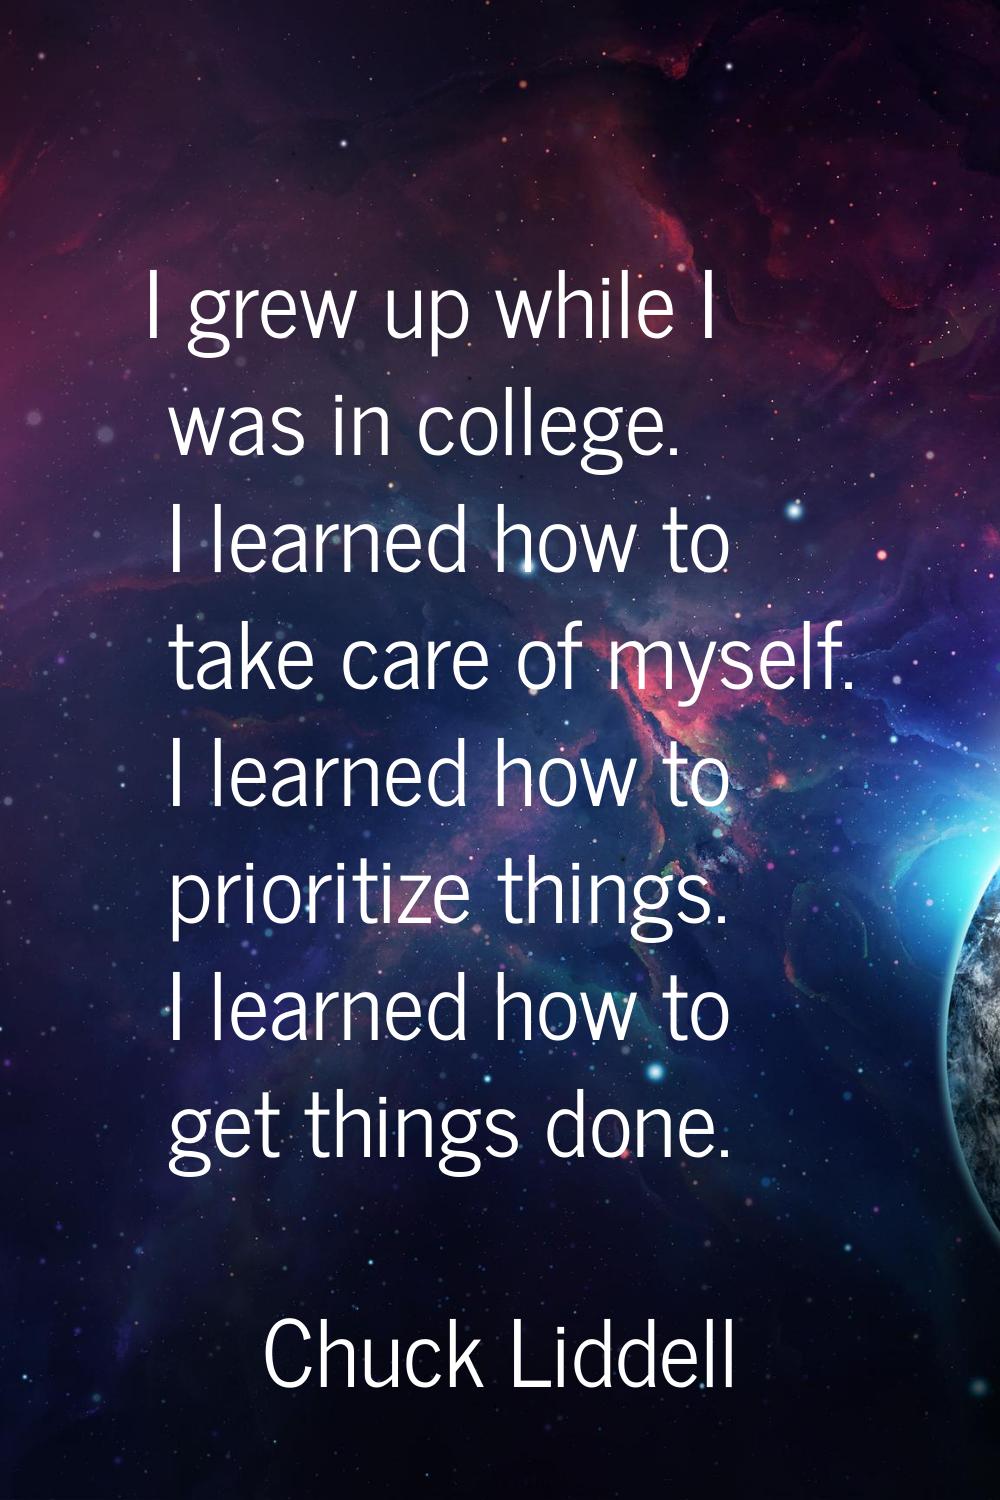 I grew up while I was in college. I learned how to take care of myself. I learned how to prioritize